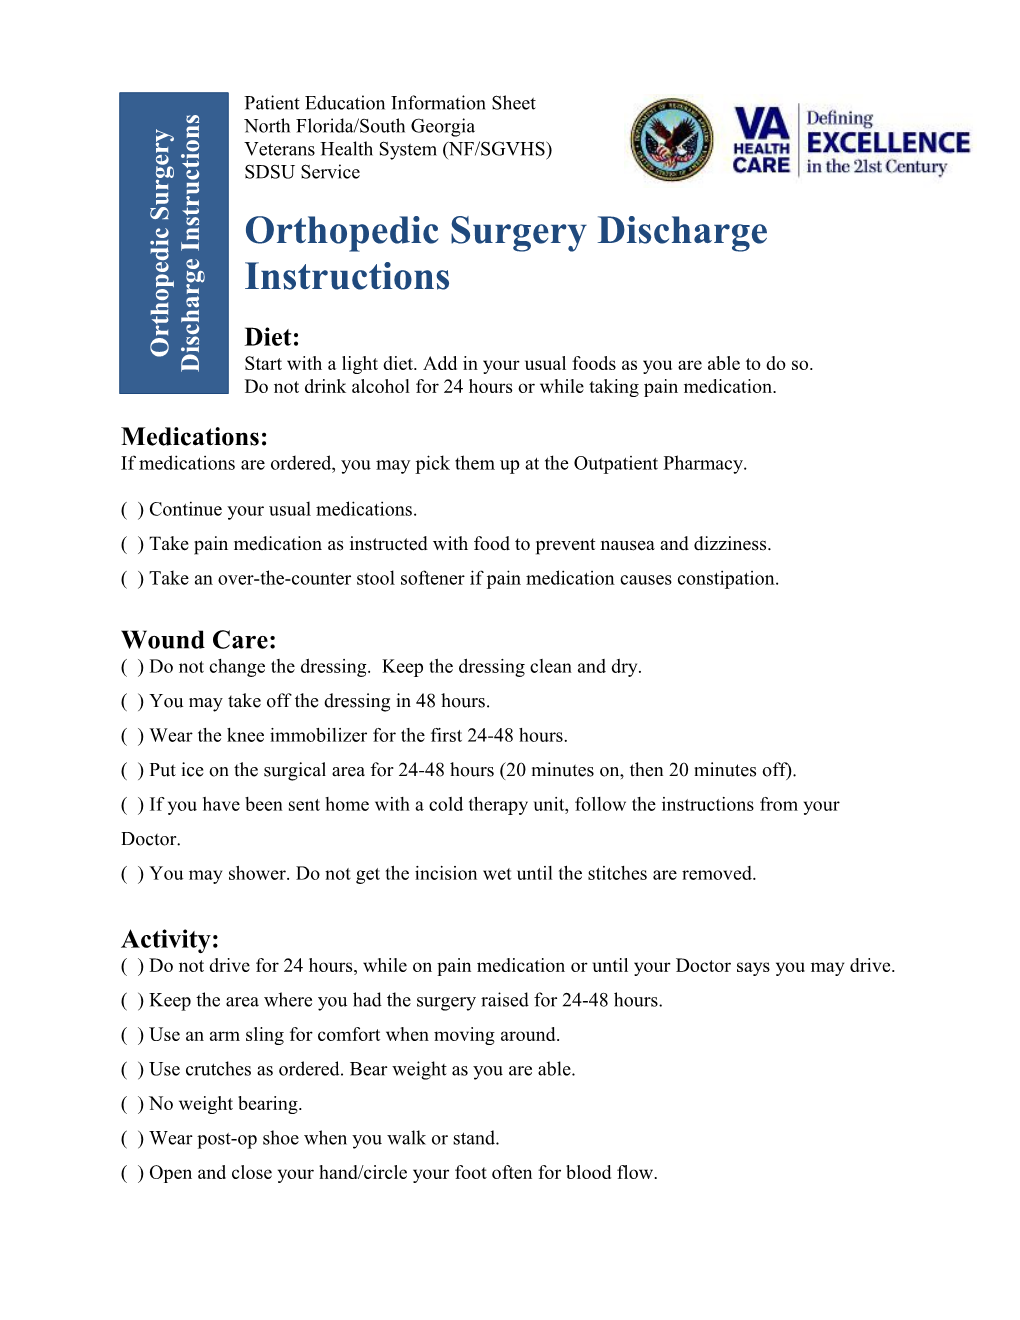 Orthopedic Surgery Discharge Instructions